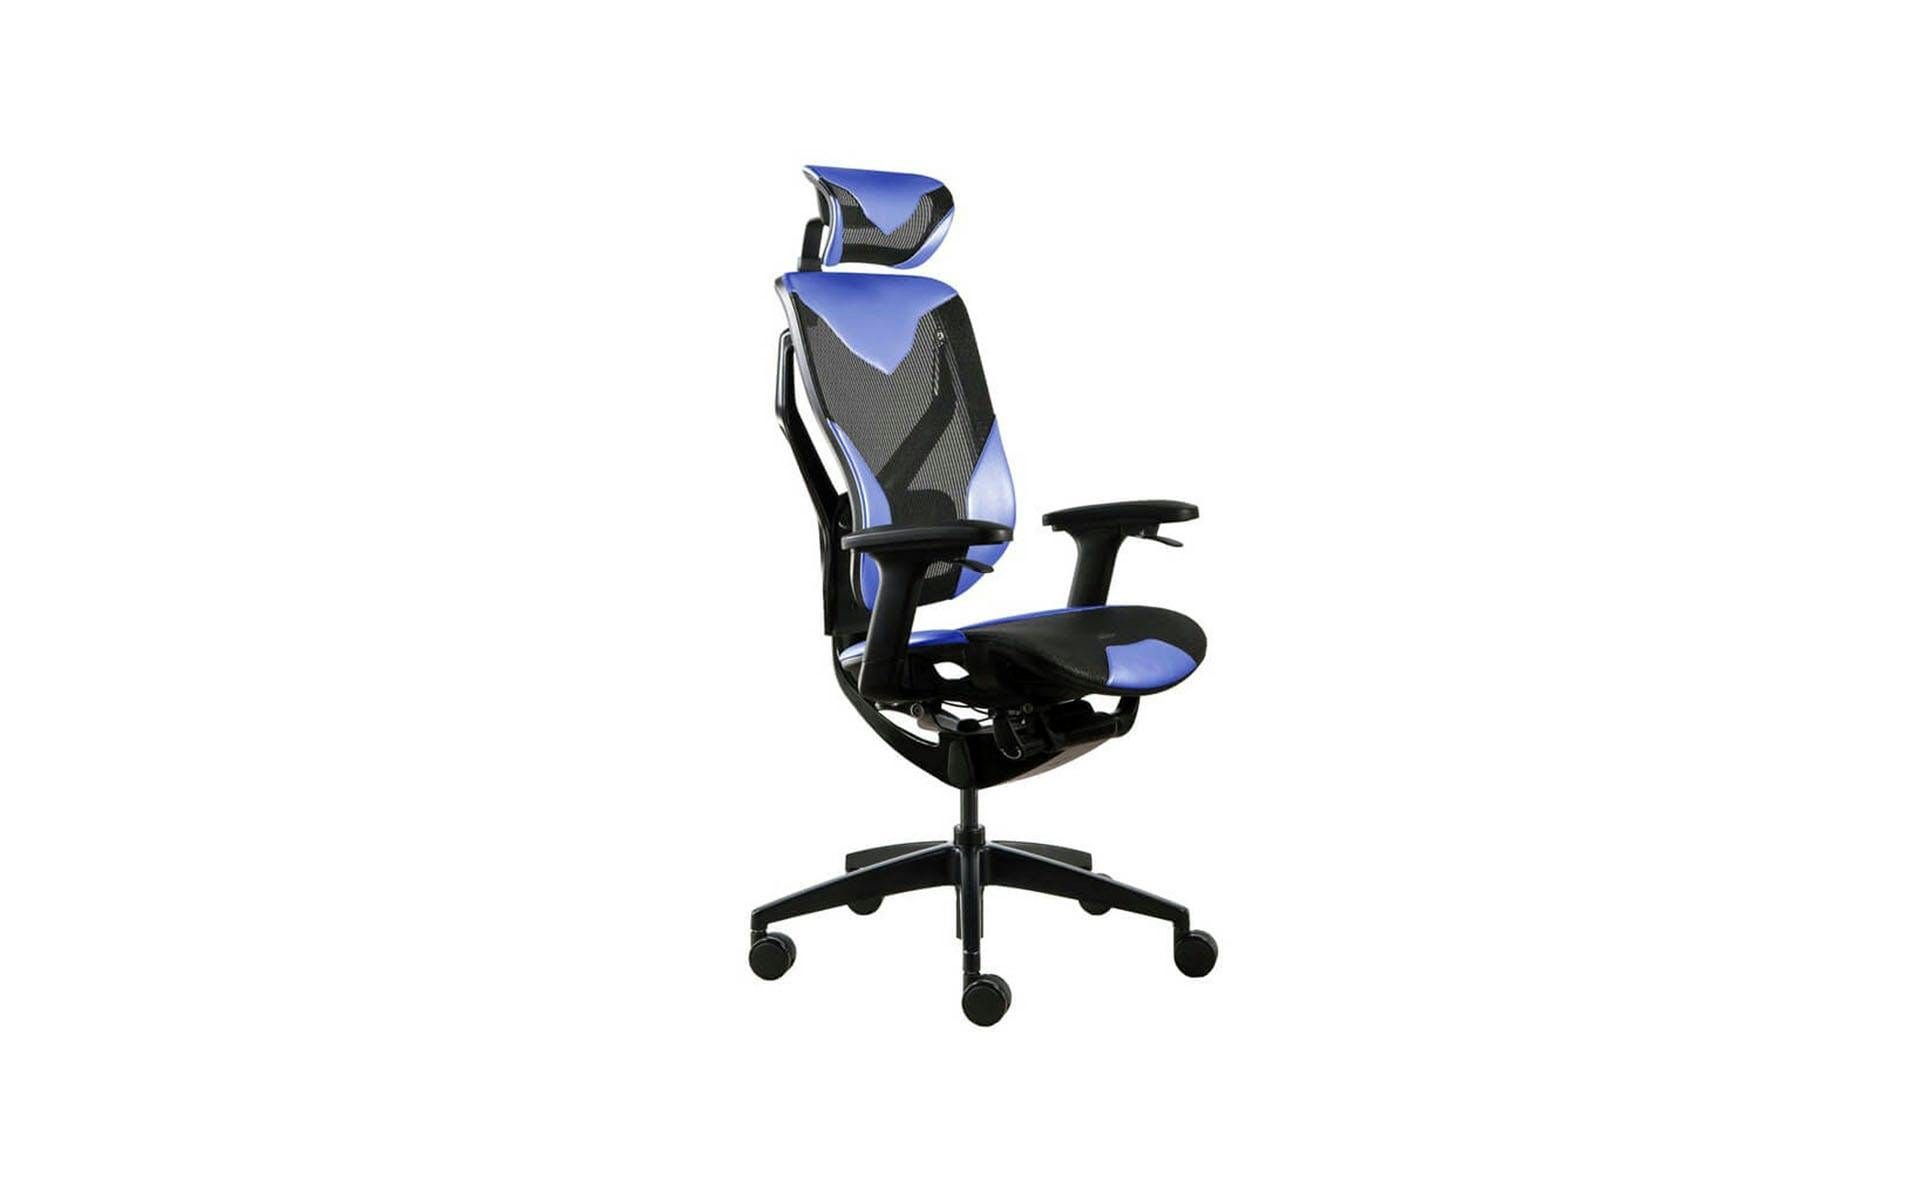 Blue gaming chair